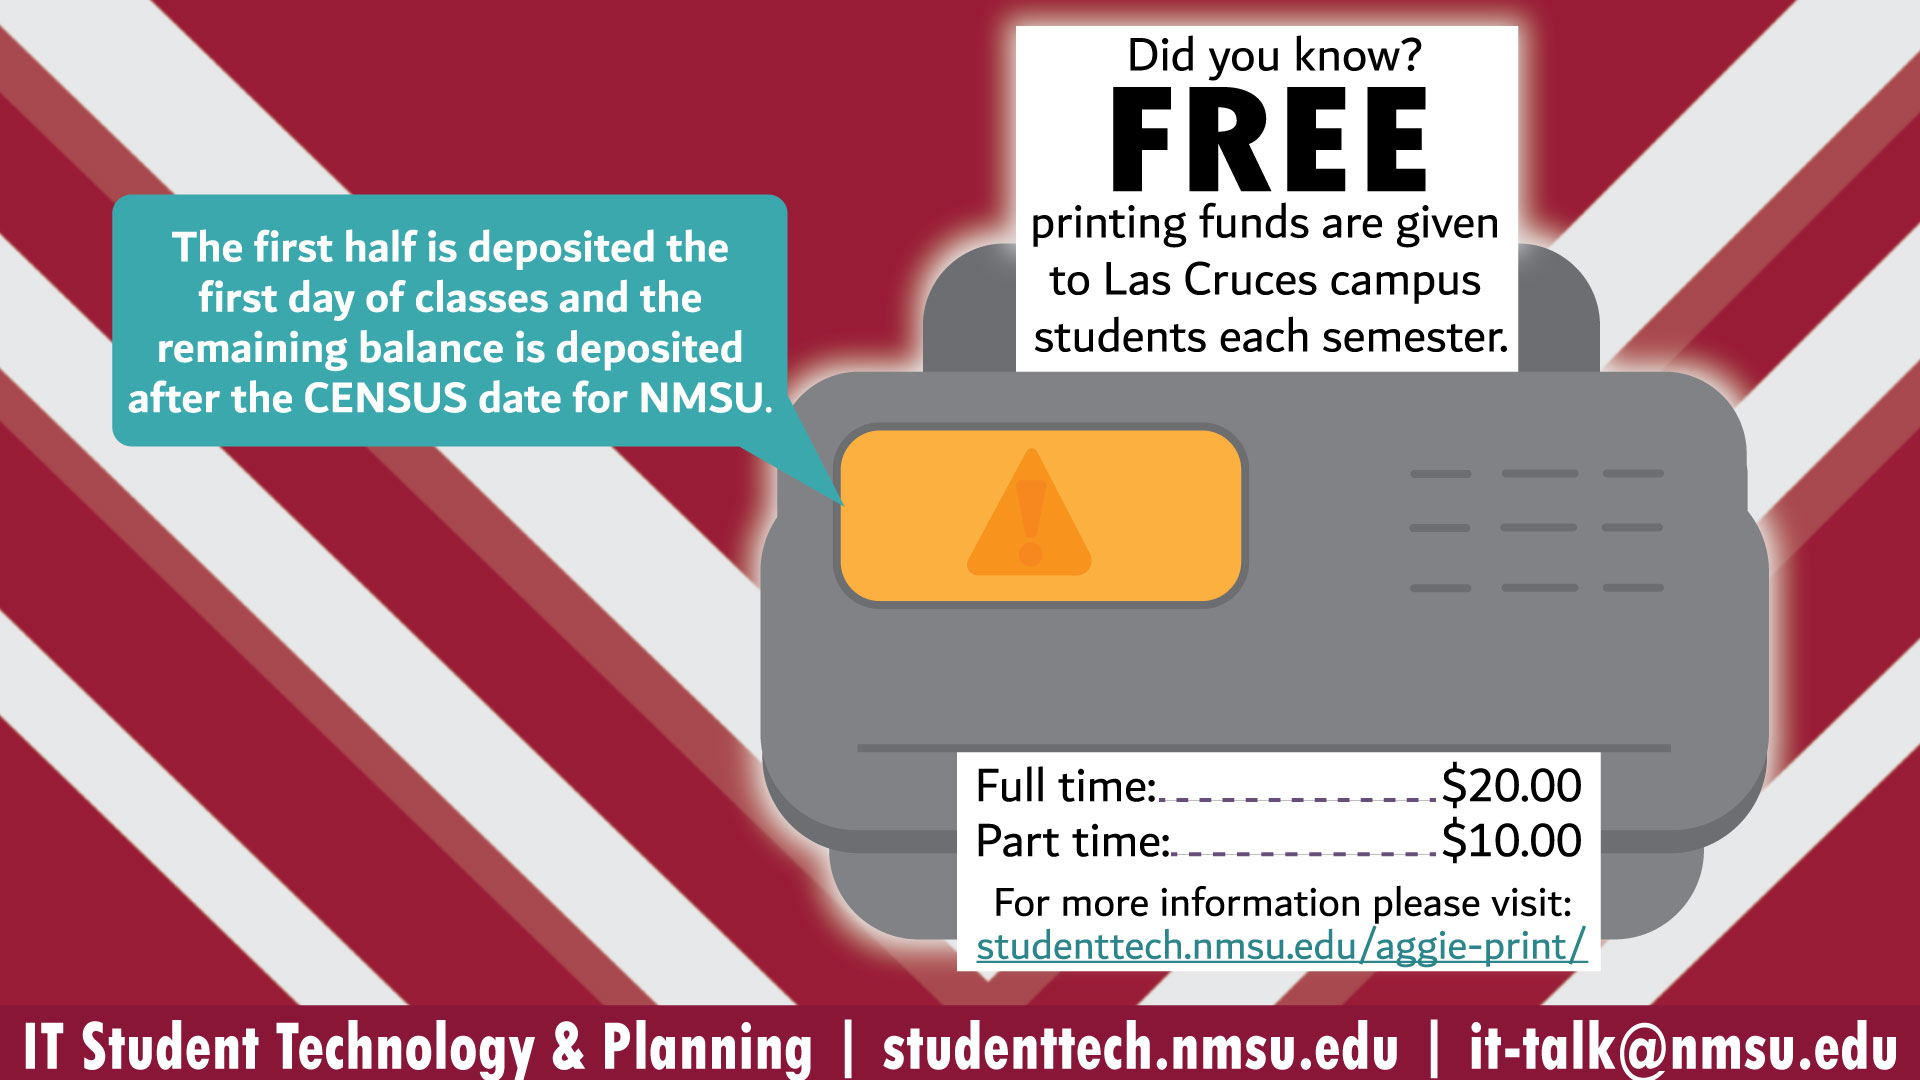 Did you know? Free printing funds are given to Las Cruces campus students each semester. The first half is deposited the first day of classes, and the remainder is deposited after the census date for NMSU.